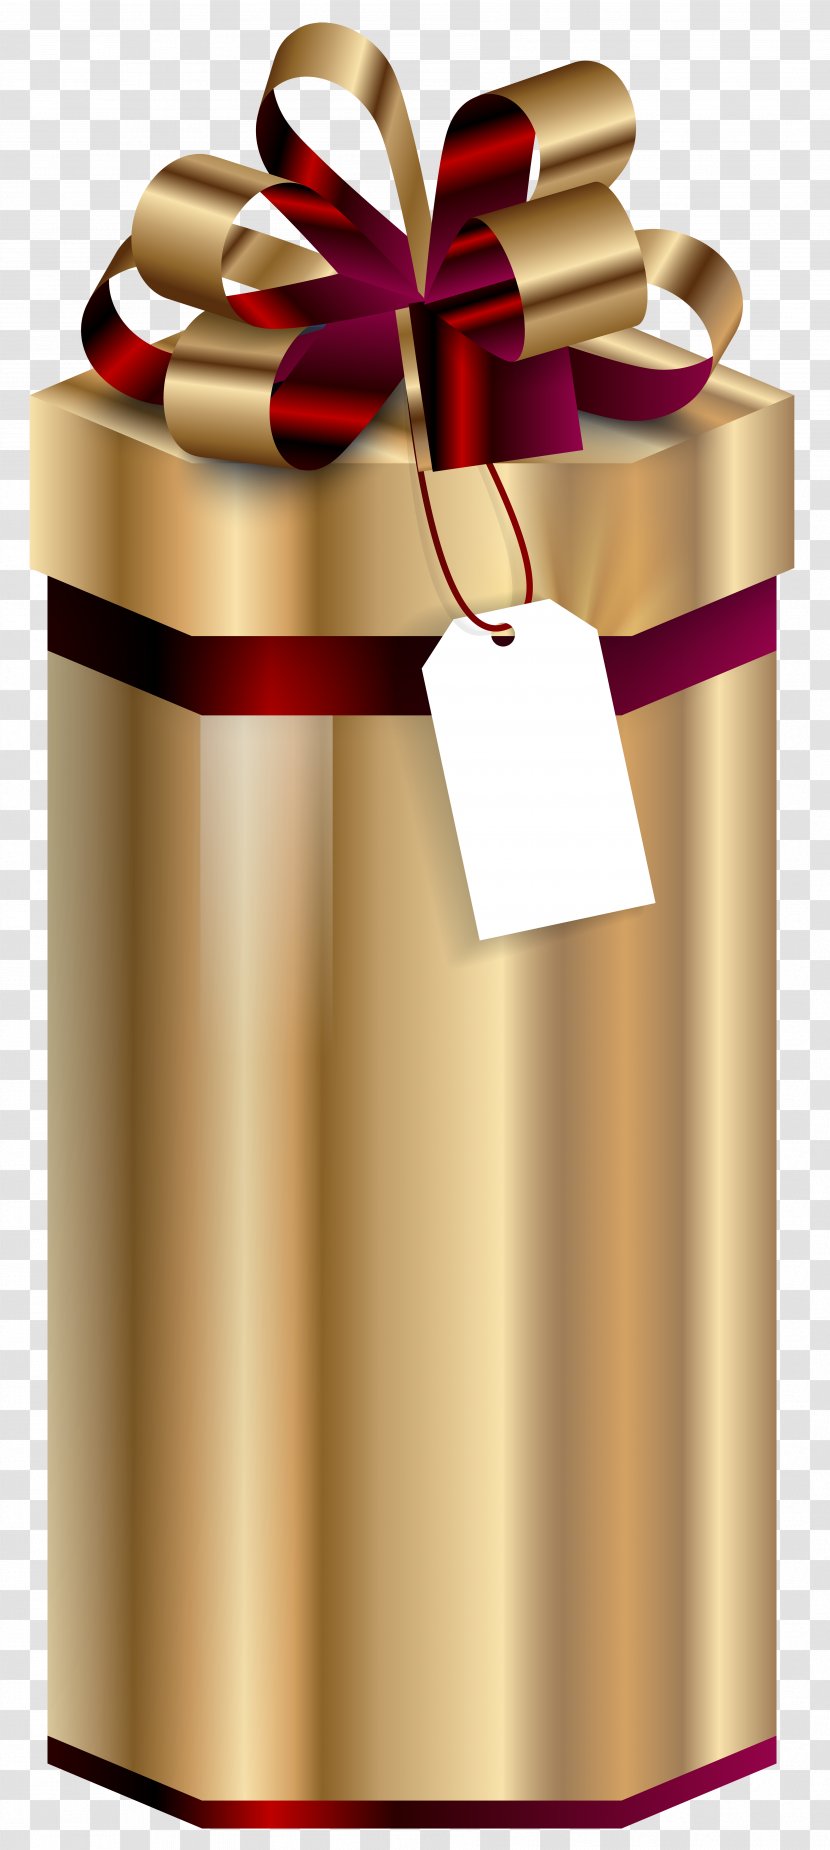 Cut The Rope: Holiday Gift Boxing Wrapping - Product Design - Box Clip Art Image Transparent PNG